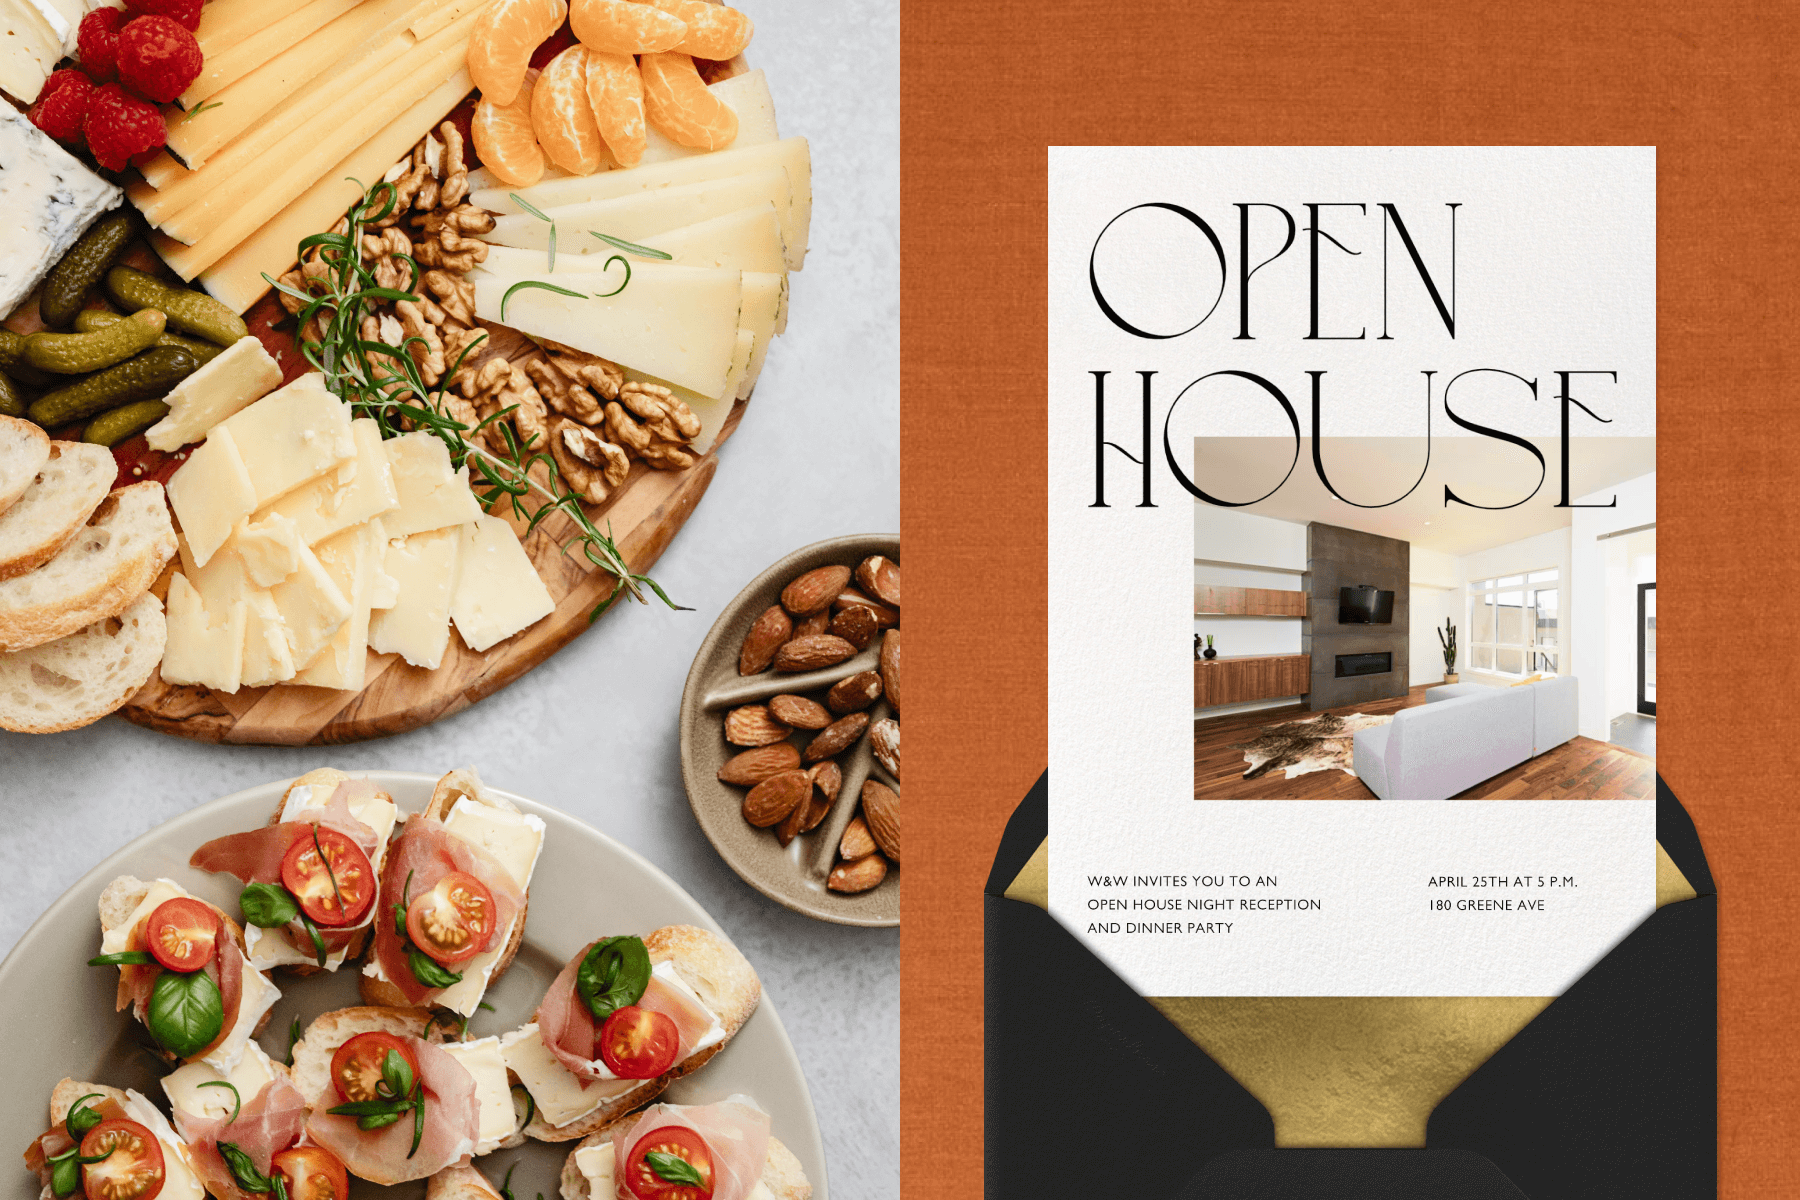 Left: An overhead image of three plates of different hors d’oeuvres; Right: An open house invitation with space to upload a photo.